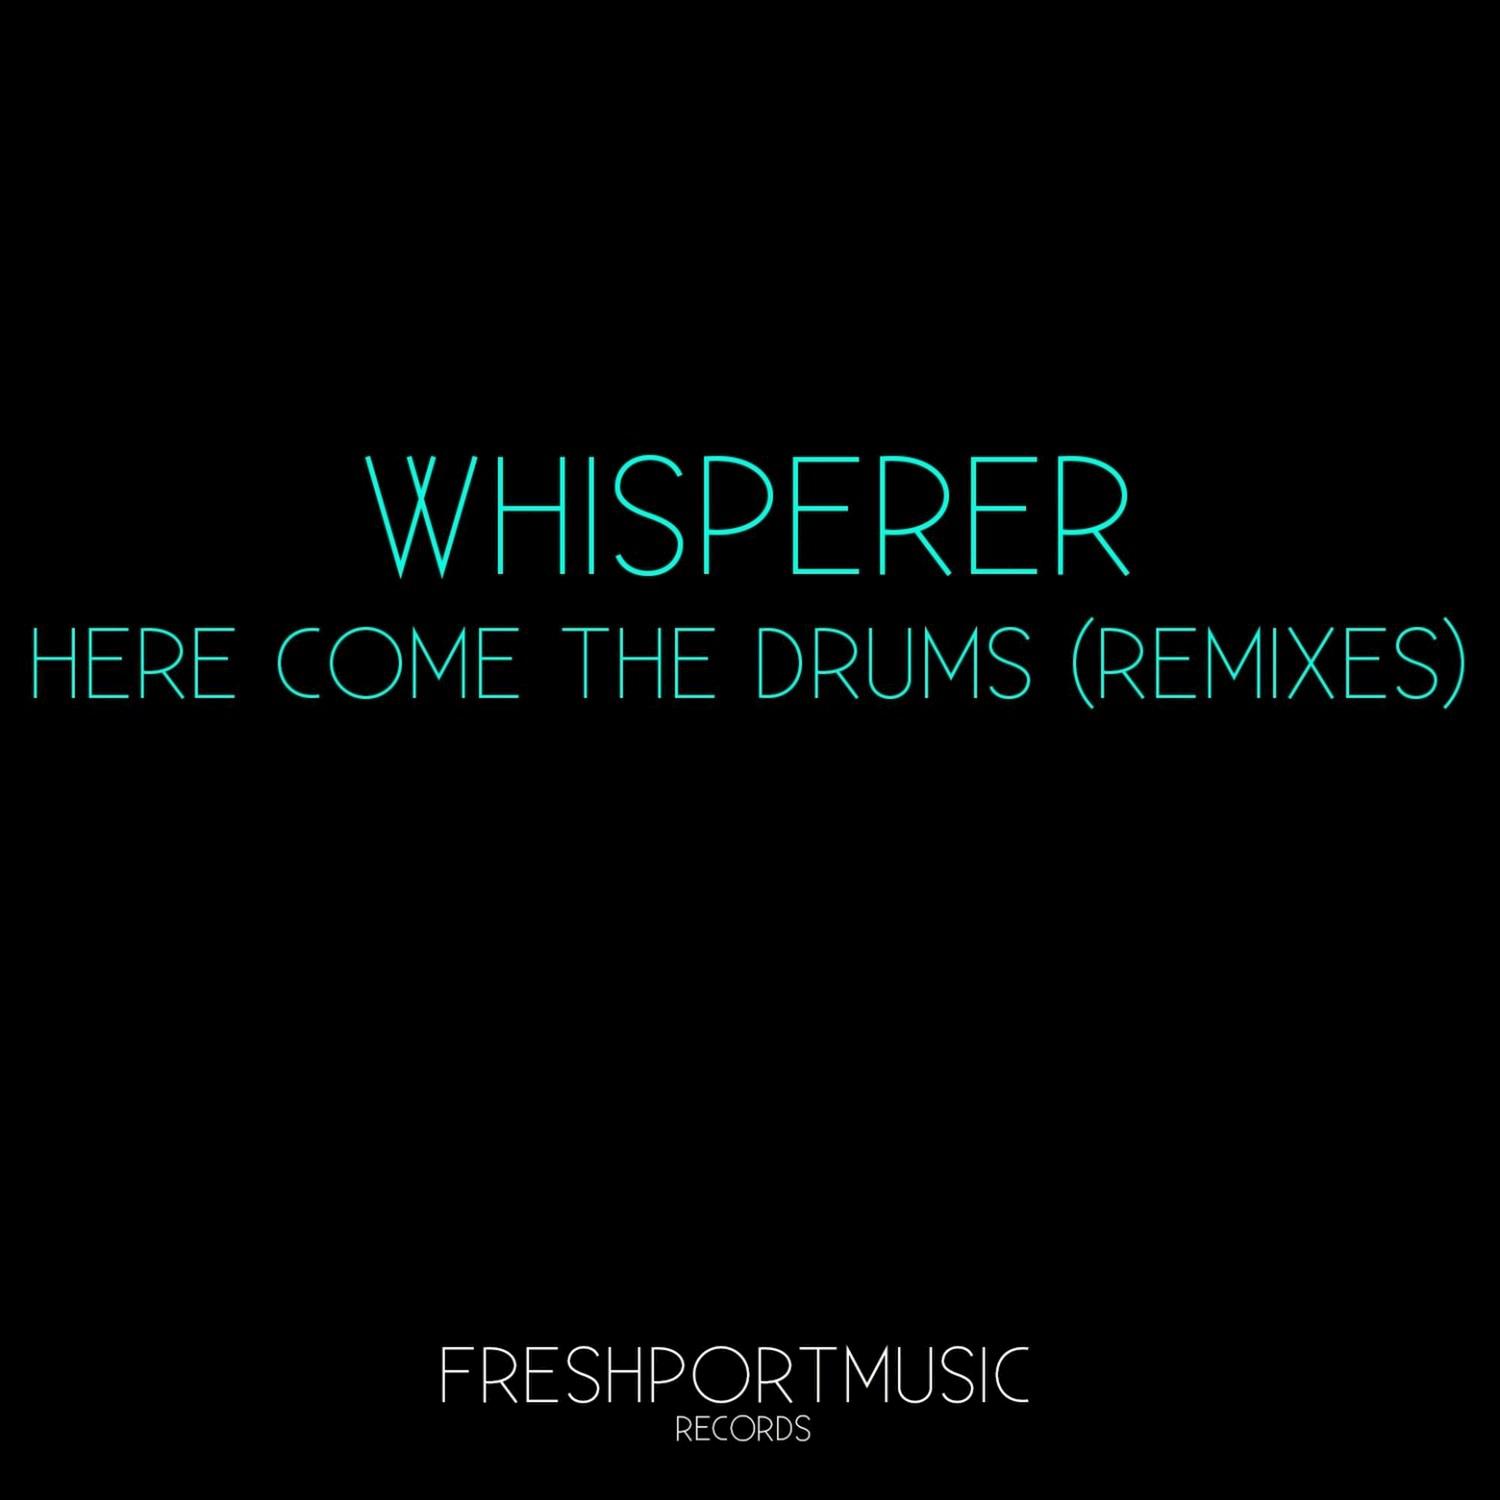 Here Come the Drums (Pablo Caballero Remix)